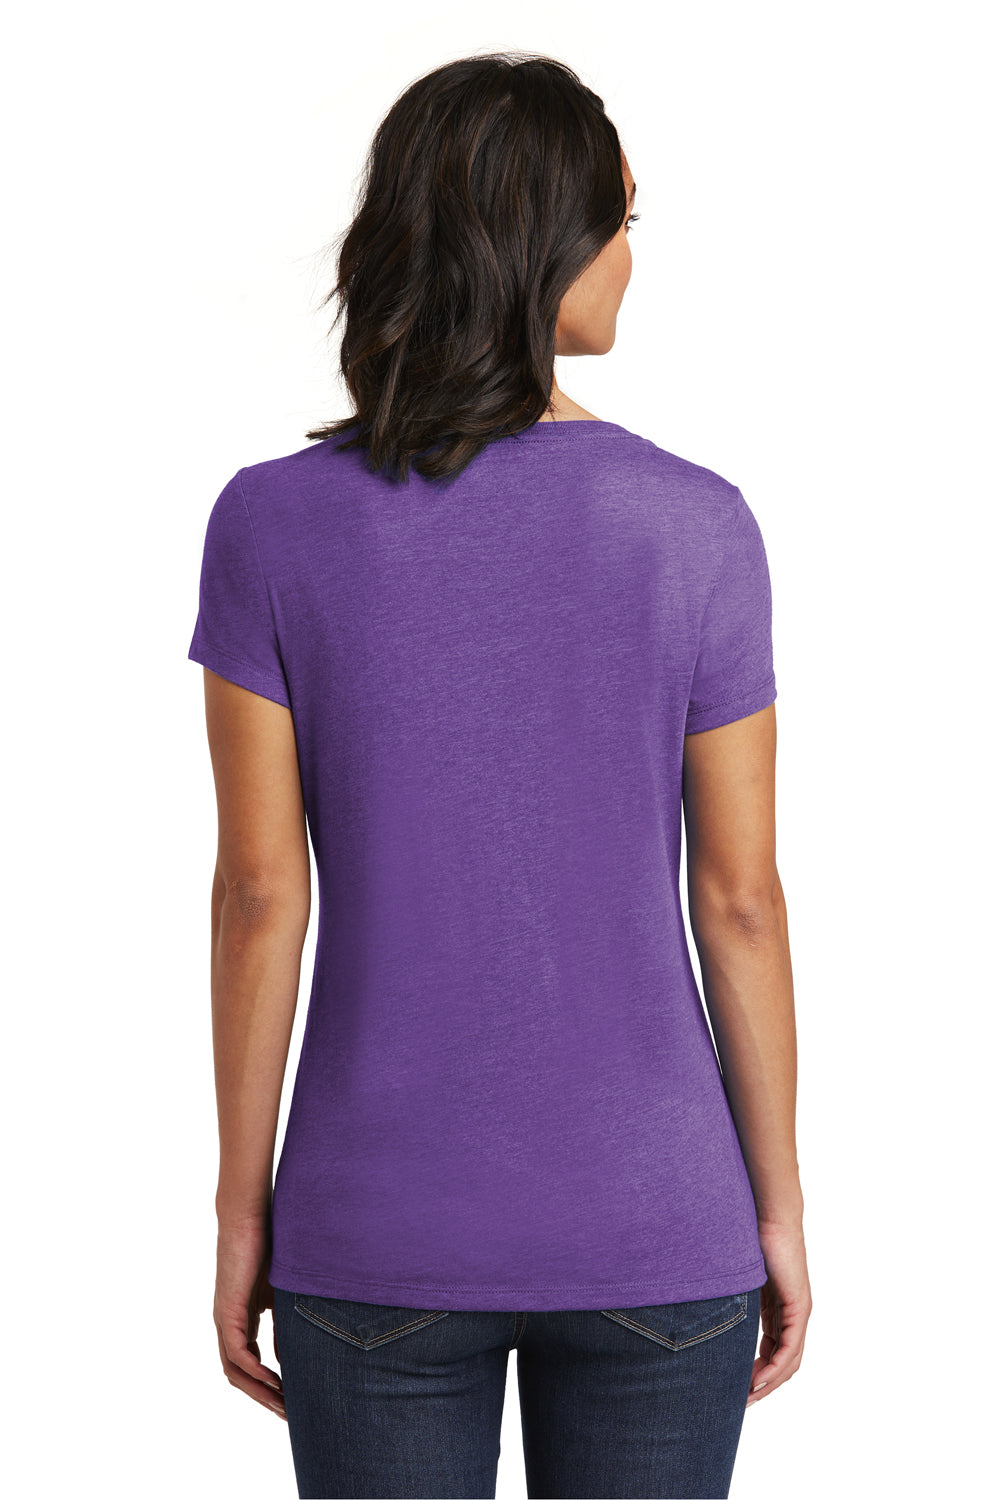 District DT6503 Womens Very Important Short Sleeve V-Neck T-Shirt Heather Purple Back